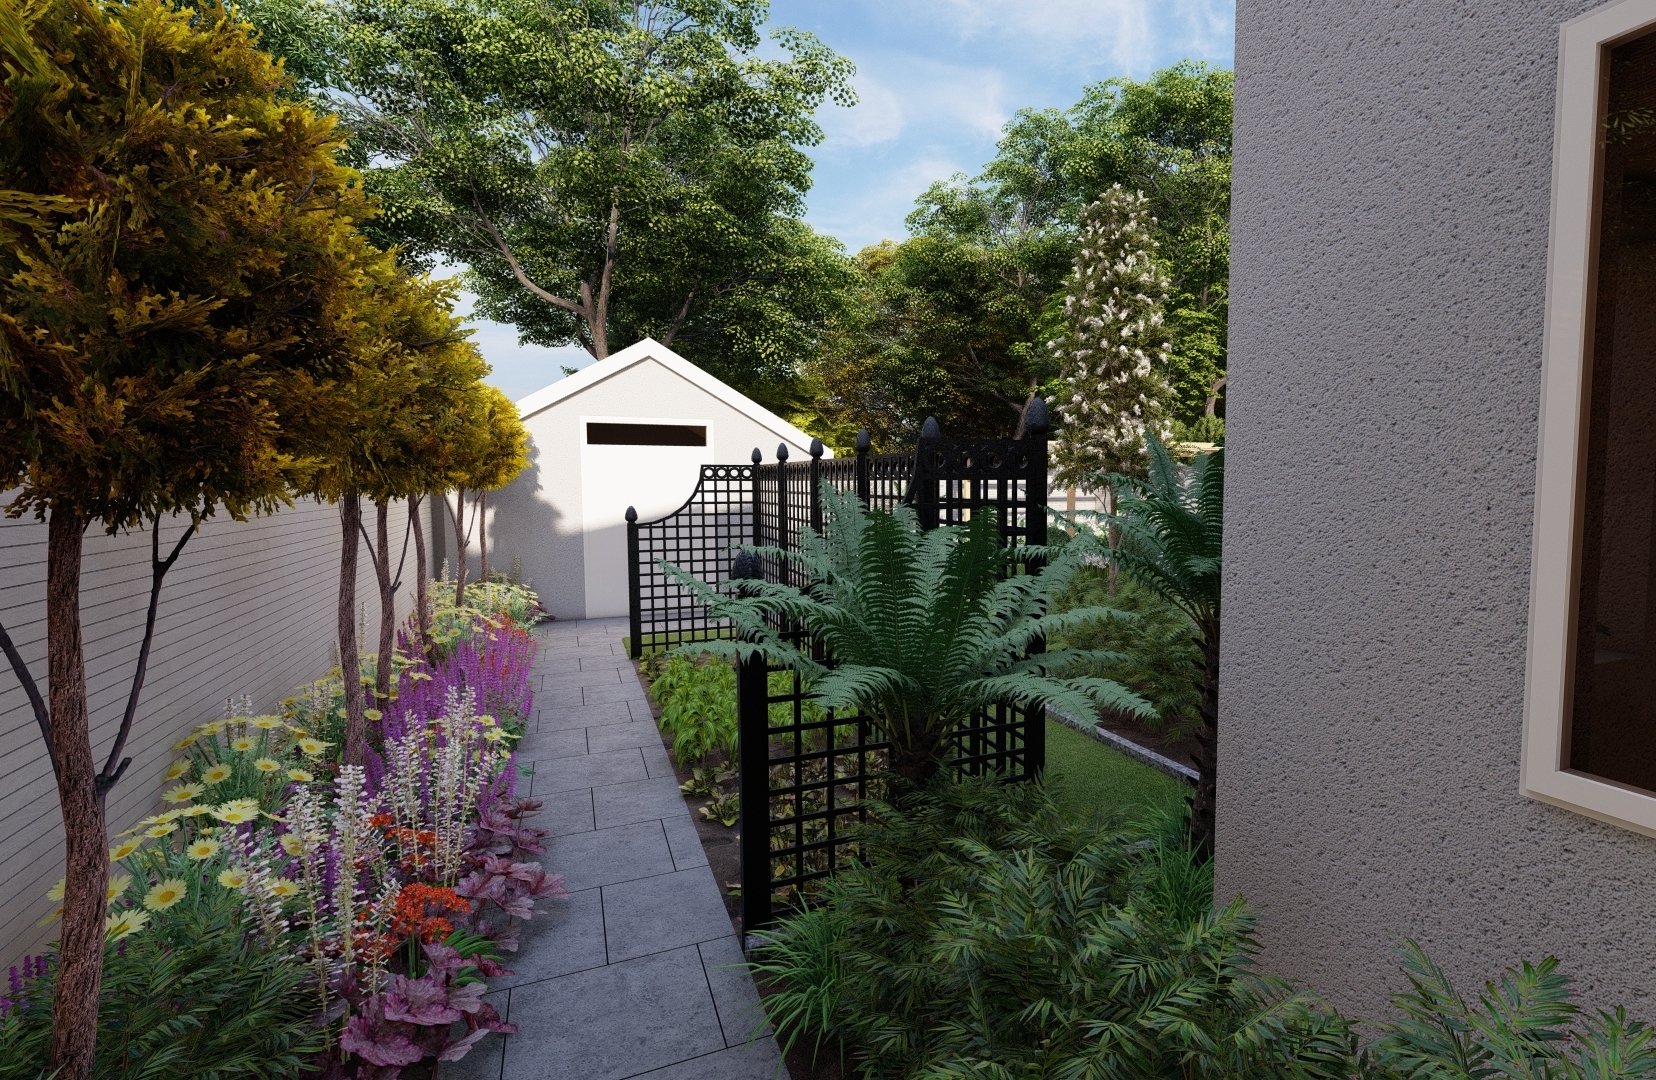 Family Garden Design in Terenure, Dublin 6W with Bespoke Fencing and custom made steel garden Trellis screens separating ornamental and vegetable growing spaces | Owen Chubb Garden Landscapers, Tel 087-2306128